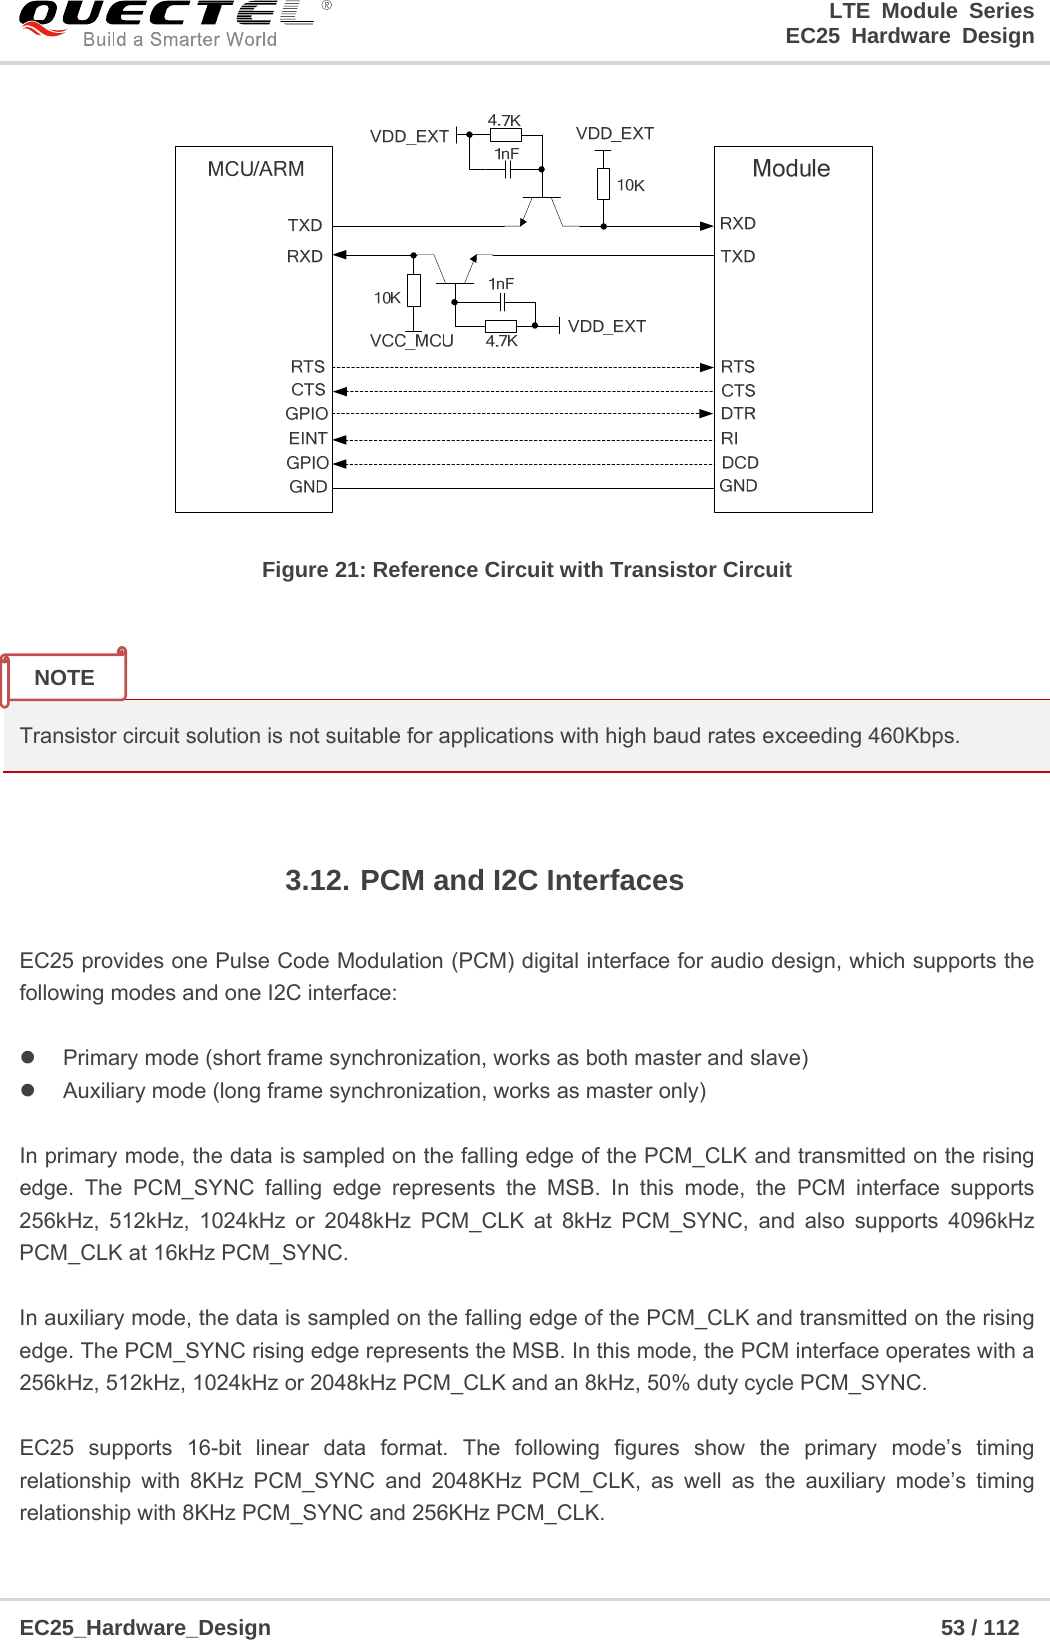 LTE Module Series                                                  EC25 Hardware Design  EC25_Hardware_Design                                                             53 / 112     Figure 21: Reference Circuit with Transistor Circuit    Transistor circuit solution is not suitable for applications with high baud rates exceeding 460Kbps.  3.12. PCM and I2C Interfaces  EC25 provides one Pulse Code Modulation (PCM) digital interface for audio design, which supports the following modes and one I2C interface:    Primary mode (short frame synchronization, works as both master and slave)   Auxiliary mode (long frame synchronization, works as master only)  In primary mode, the data is sampled on the falling edge of the PCM_CLK and transmitted on the rising edge. The PCM_SYNC falling edge represents the MSB. In this mode, the PCM interface supports 256kHz, 512kHz, 1024kHz or 2048kHz PCM_CLK at 8kHz PCM_SYNC, and also supports 4096kHz PCM_CLK at 16kHz PCM_SYNC.  In auxiliary mode, the data is sampled on the falling edge of the PCM_CLK and transmitted on the rising edge. The PCM_SYNC rising edge represents the MSB. In this mode, the PCM interface operates with a 256kHz, 512kHz, 1024kHz or 2048kHz PCM_CLK and an 8kHz, 50% duty cycle PCM_SYNC.  EC25 supports 16-bit linear data format. The following figures show the primary mode’s timing relationship with 8KHz PCM_SYNC and 2048KHz PCM_CLK, as well as the auxiliary mode’s timing relationship with 8KHz PCM_SYNC and 256KHz PCM_CLK. NOTE 